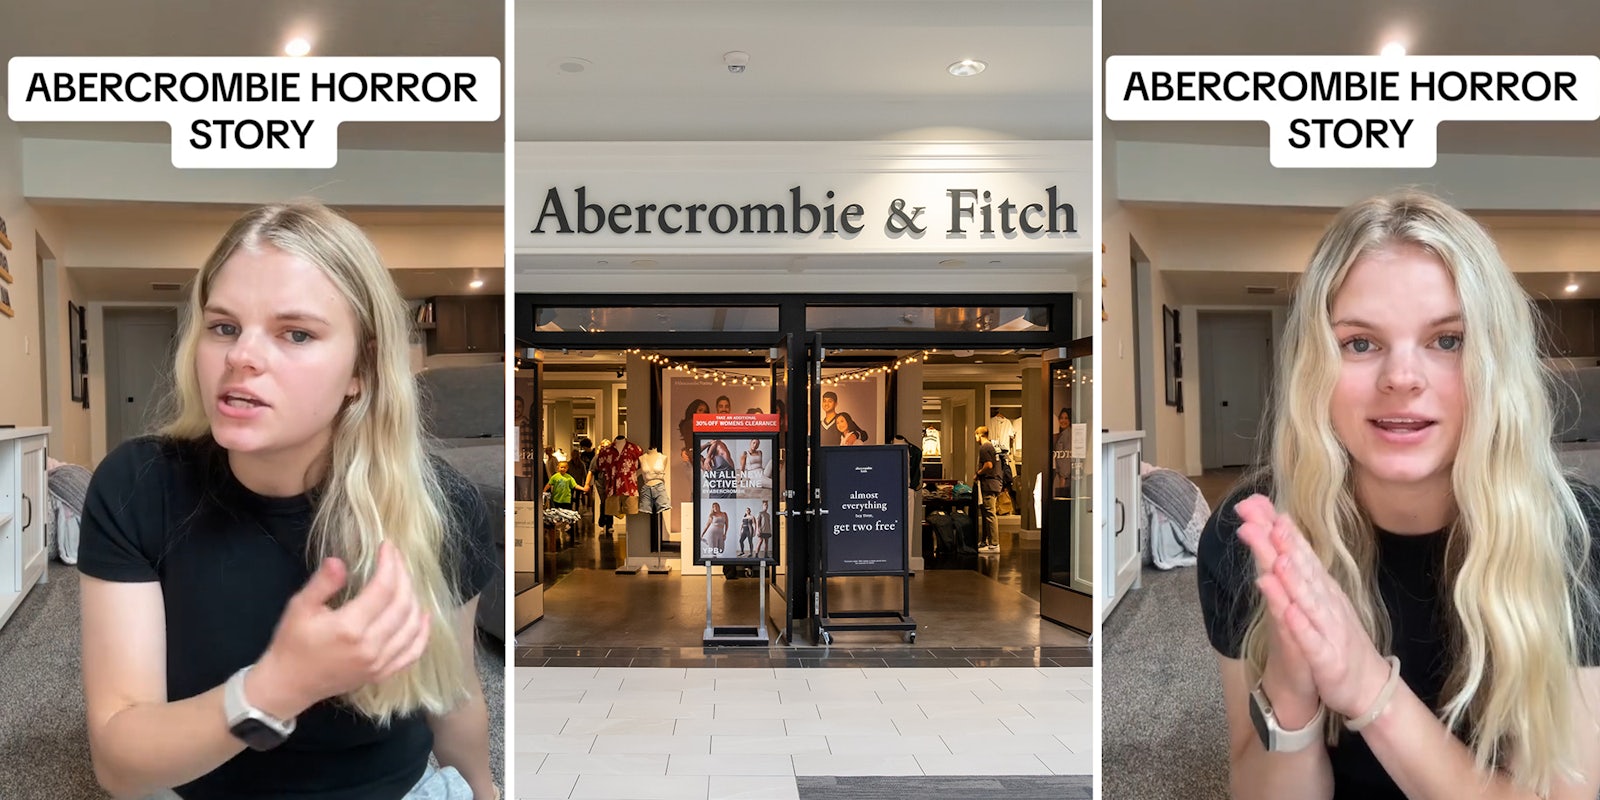 Abercrombie customer explains she only received 2 items from her large order